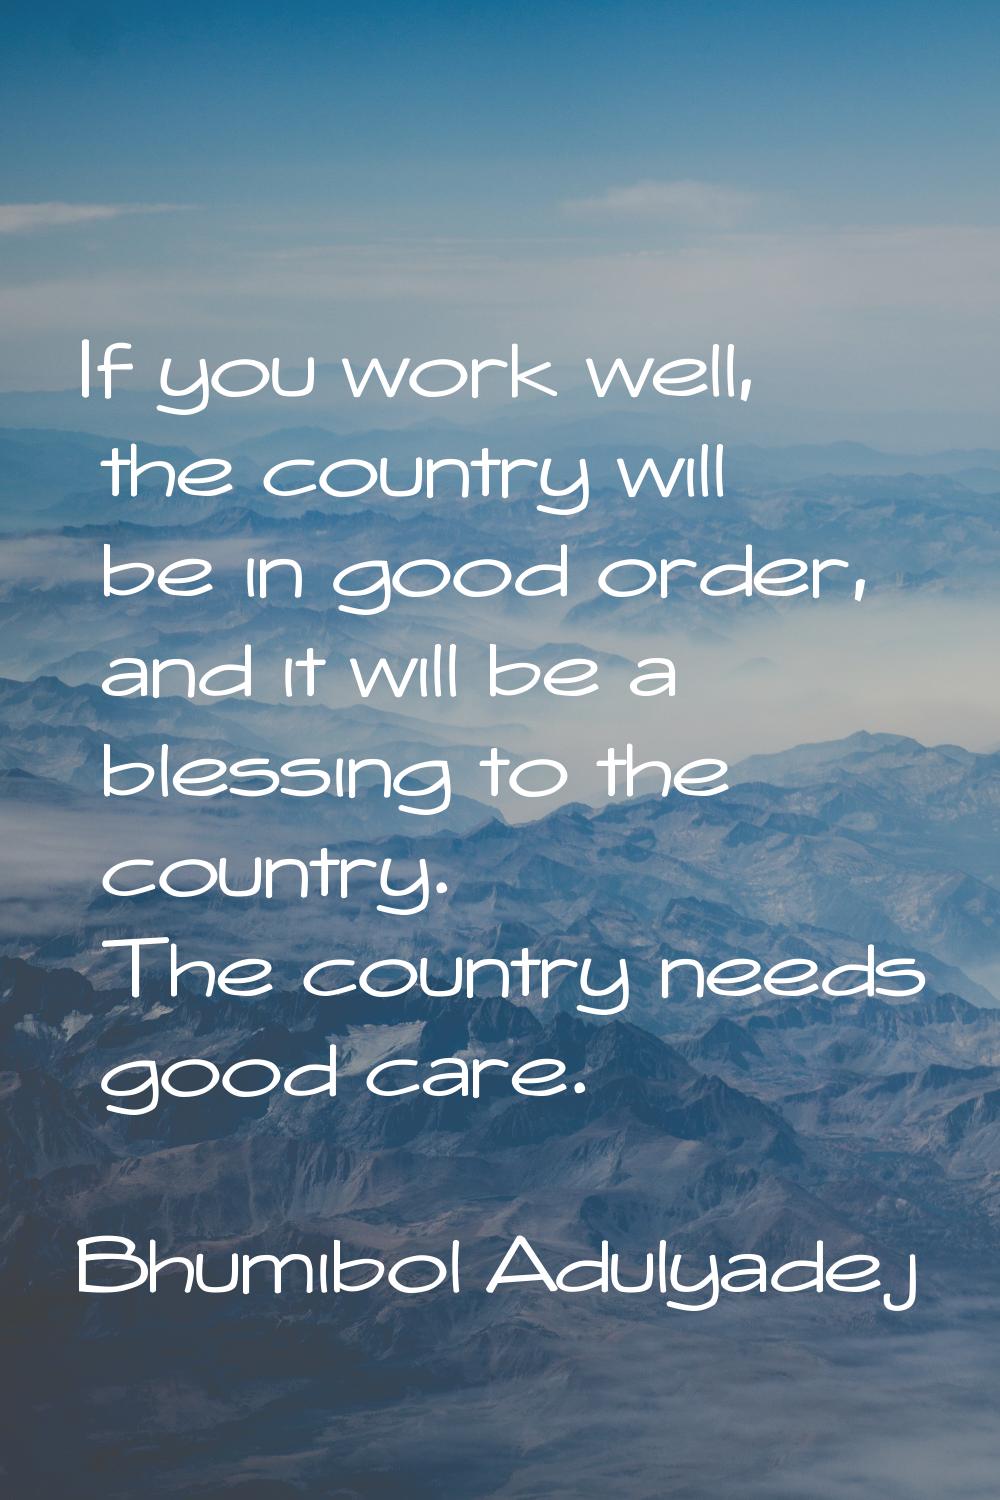 If you work well, the country will be in good order, and it will be a blessing to the country. The 